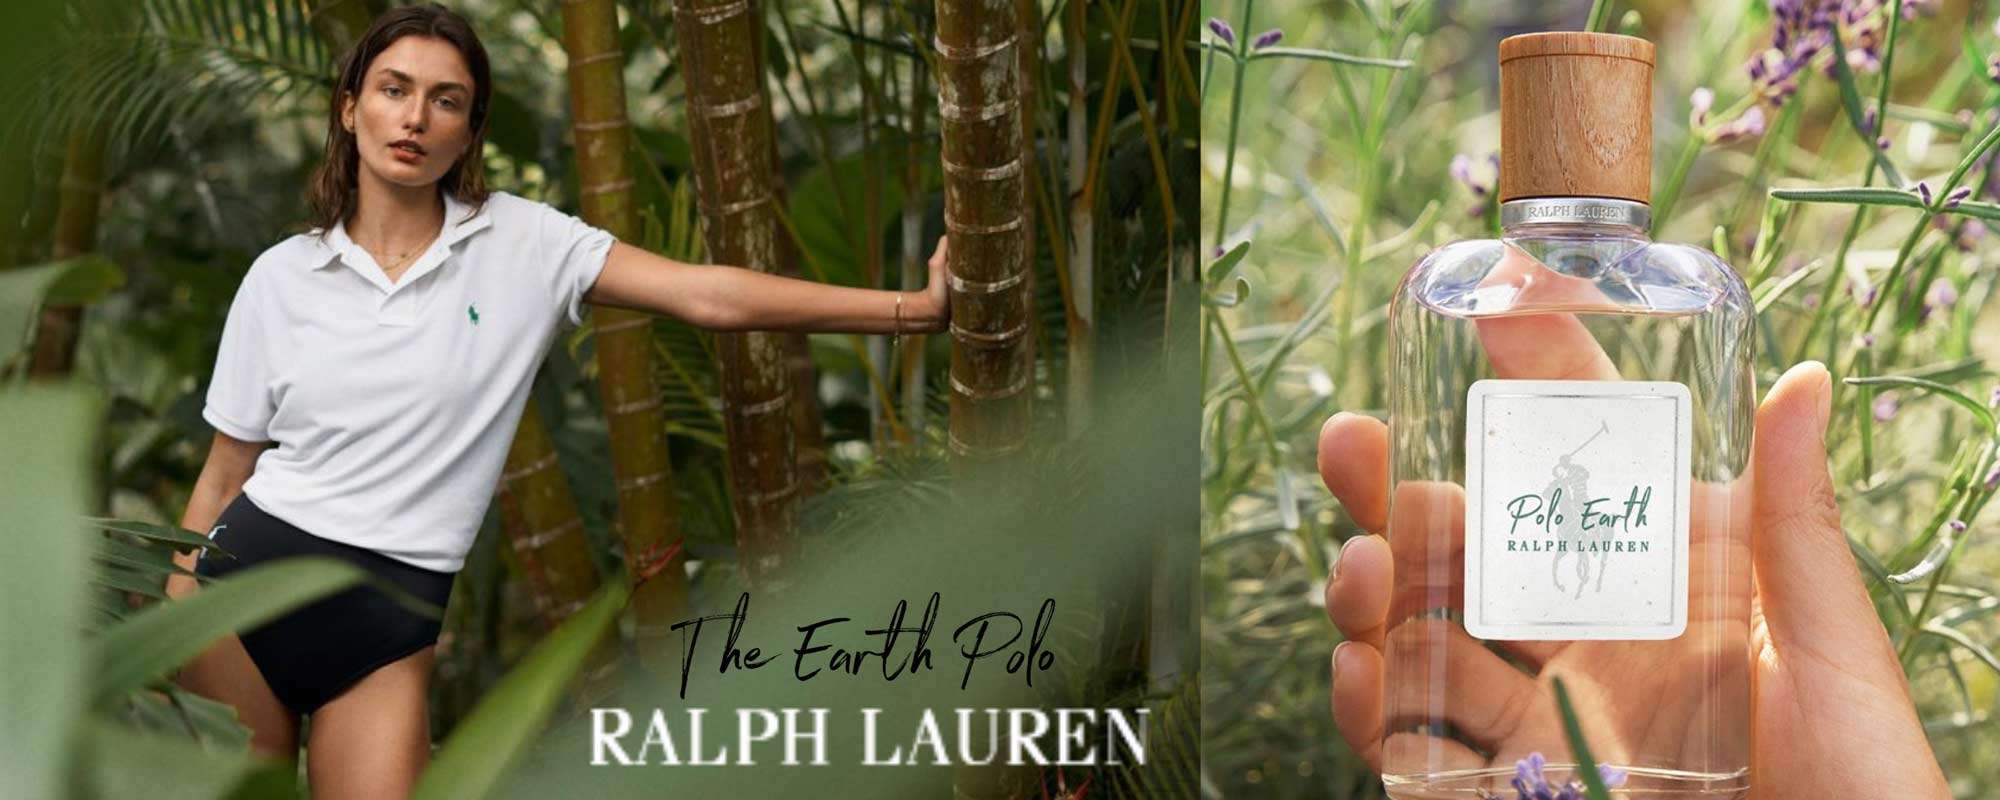 The Earth Polo by Ralph Lauren